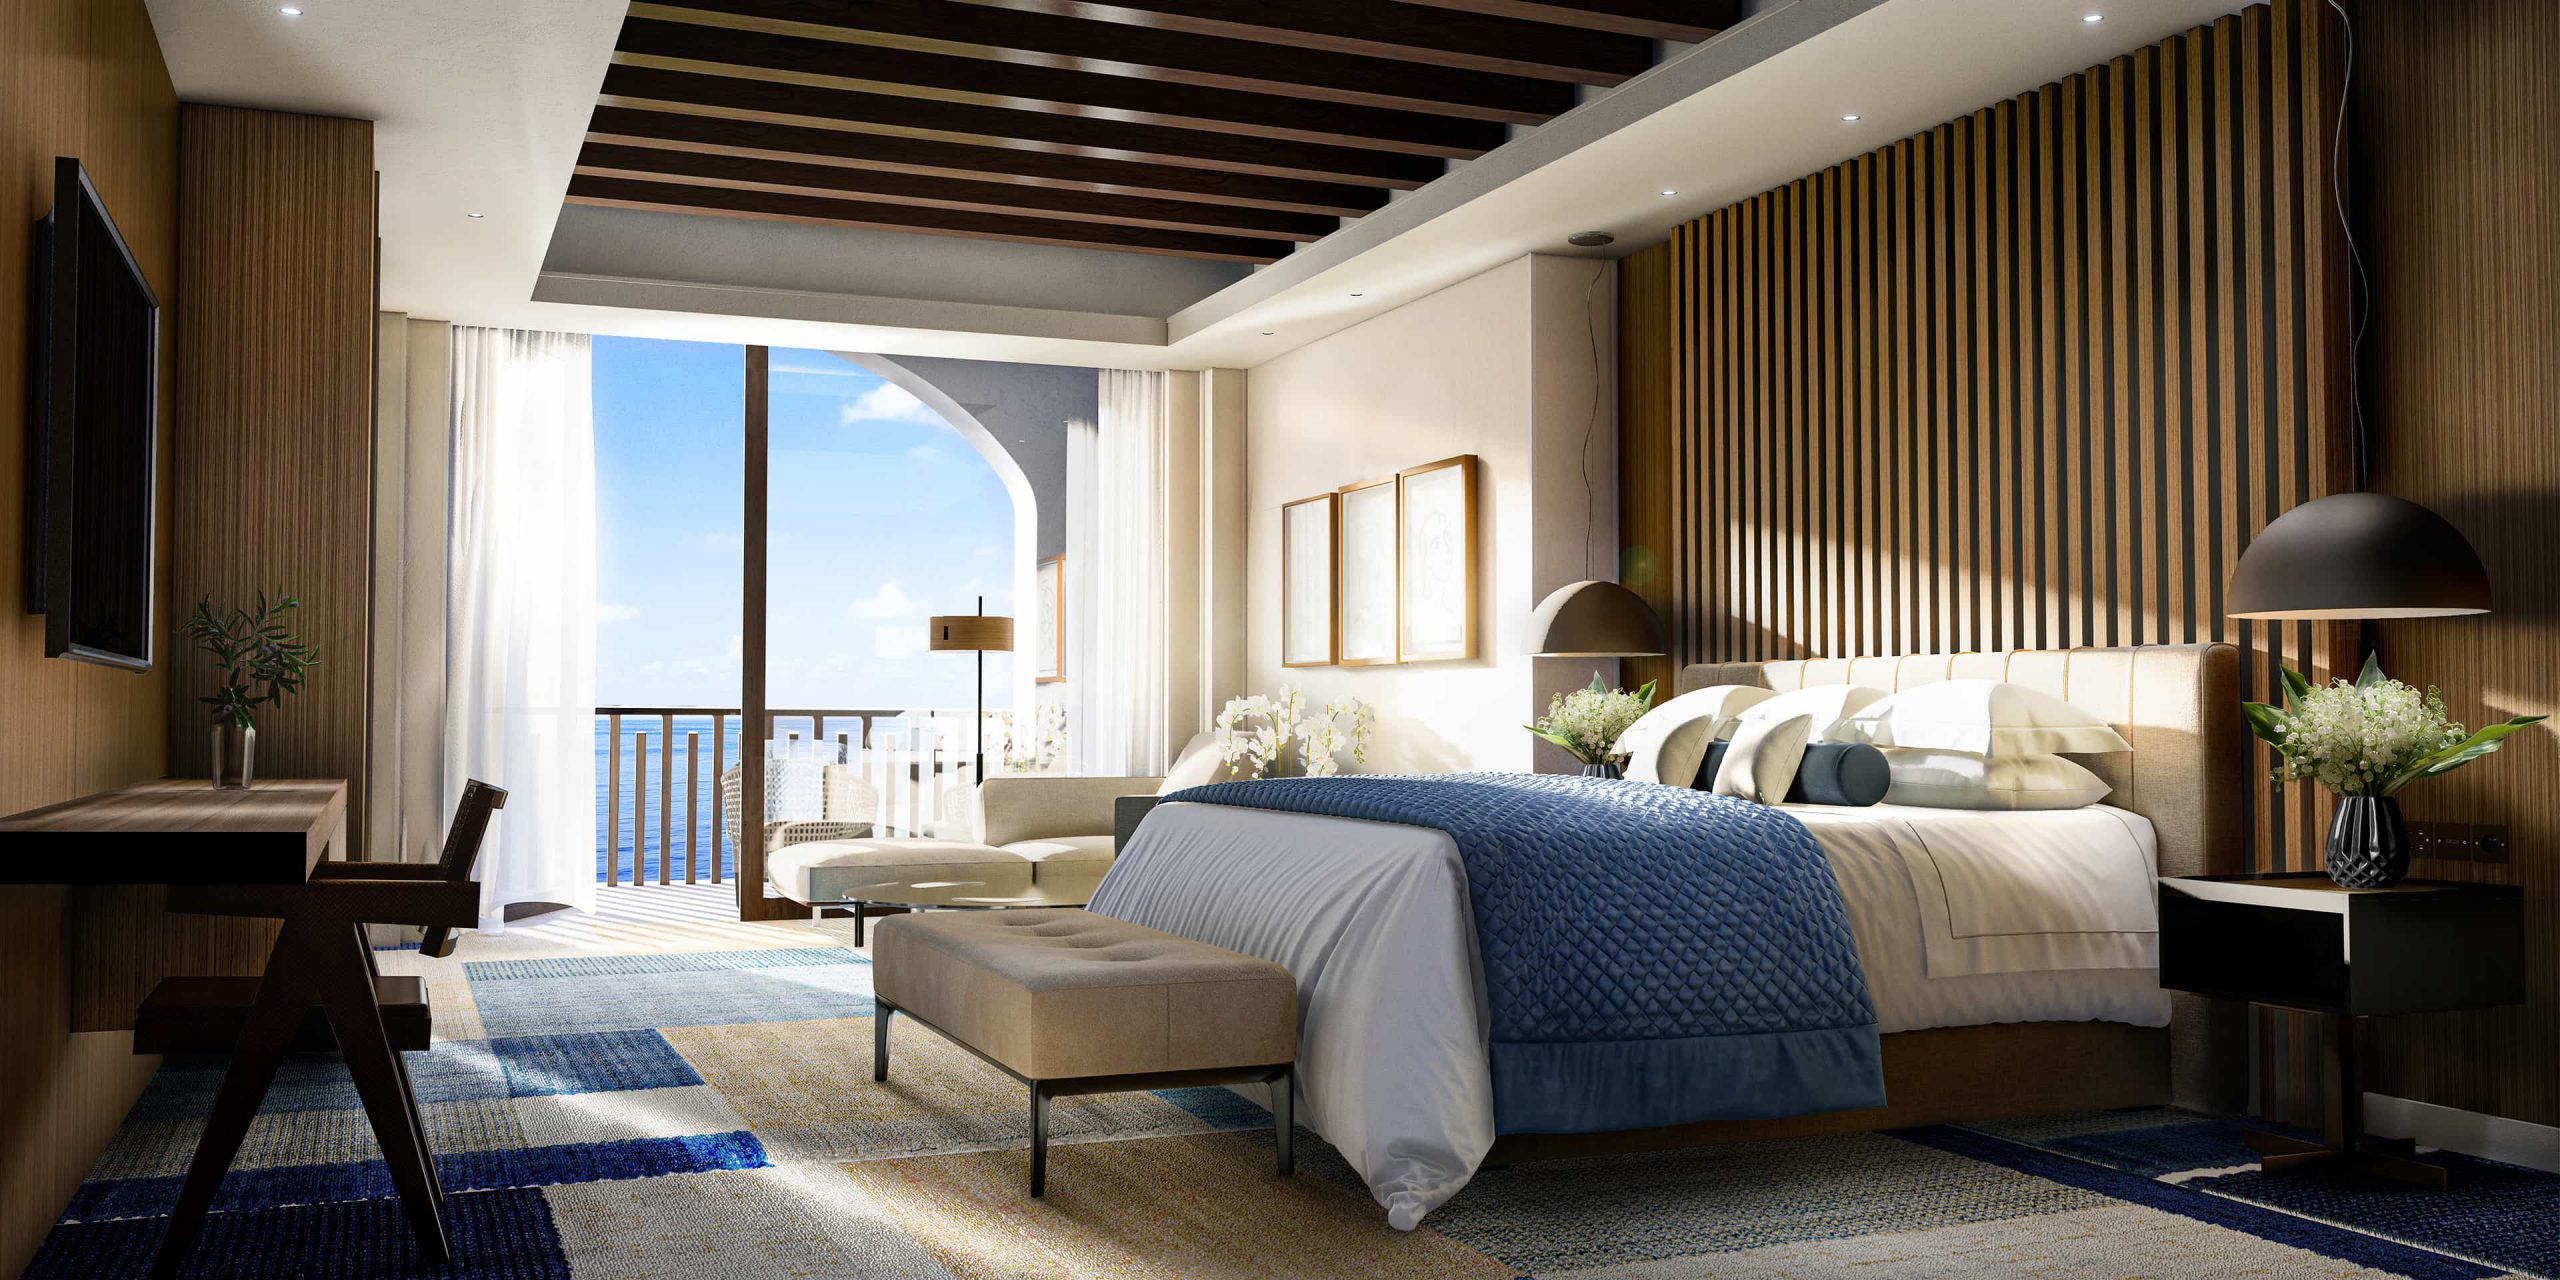 Bedroom, Hotel Le Mas. Rendered in Lumion by Ten Over Media.